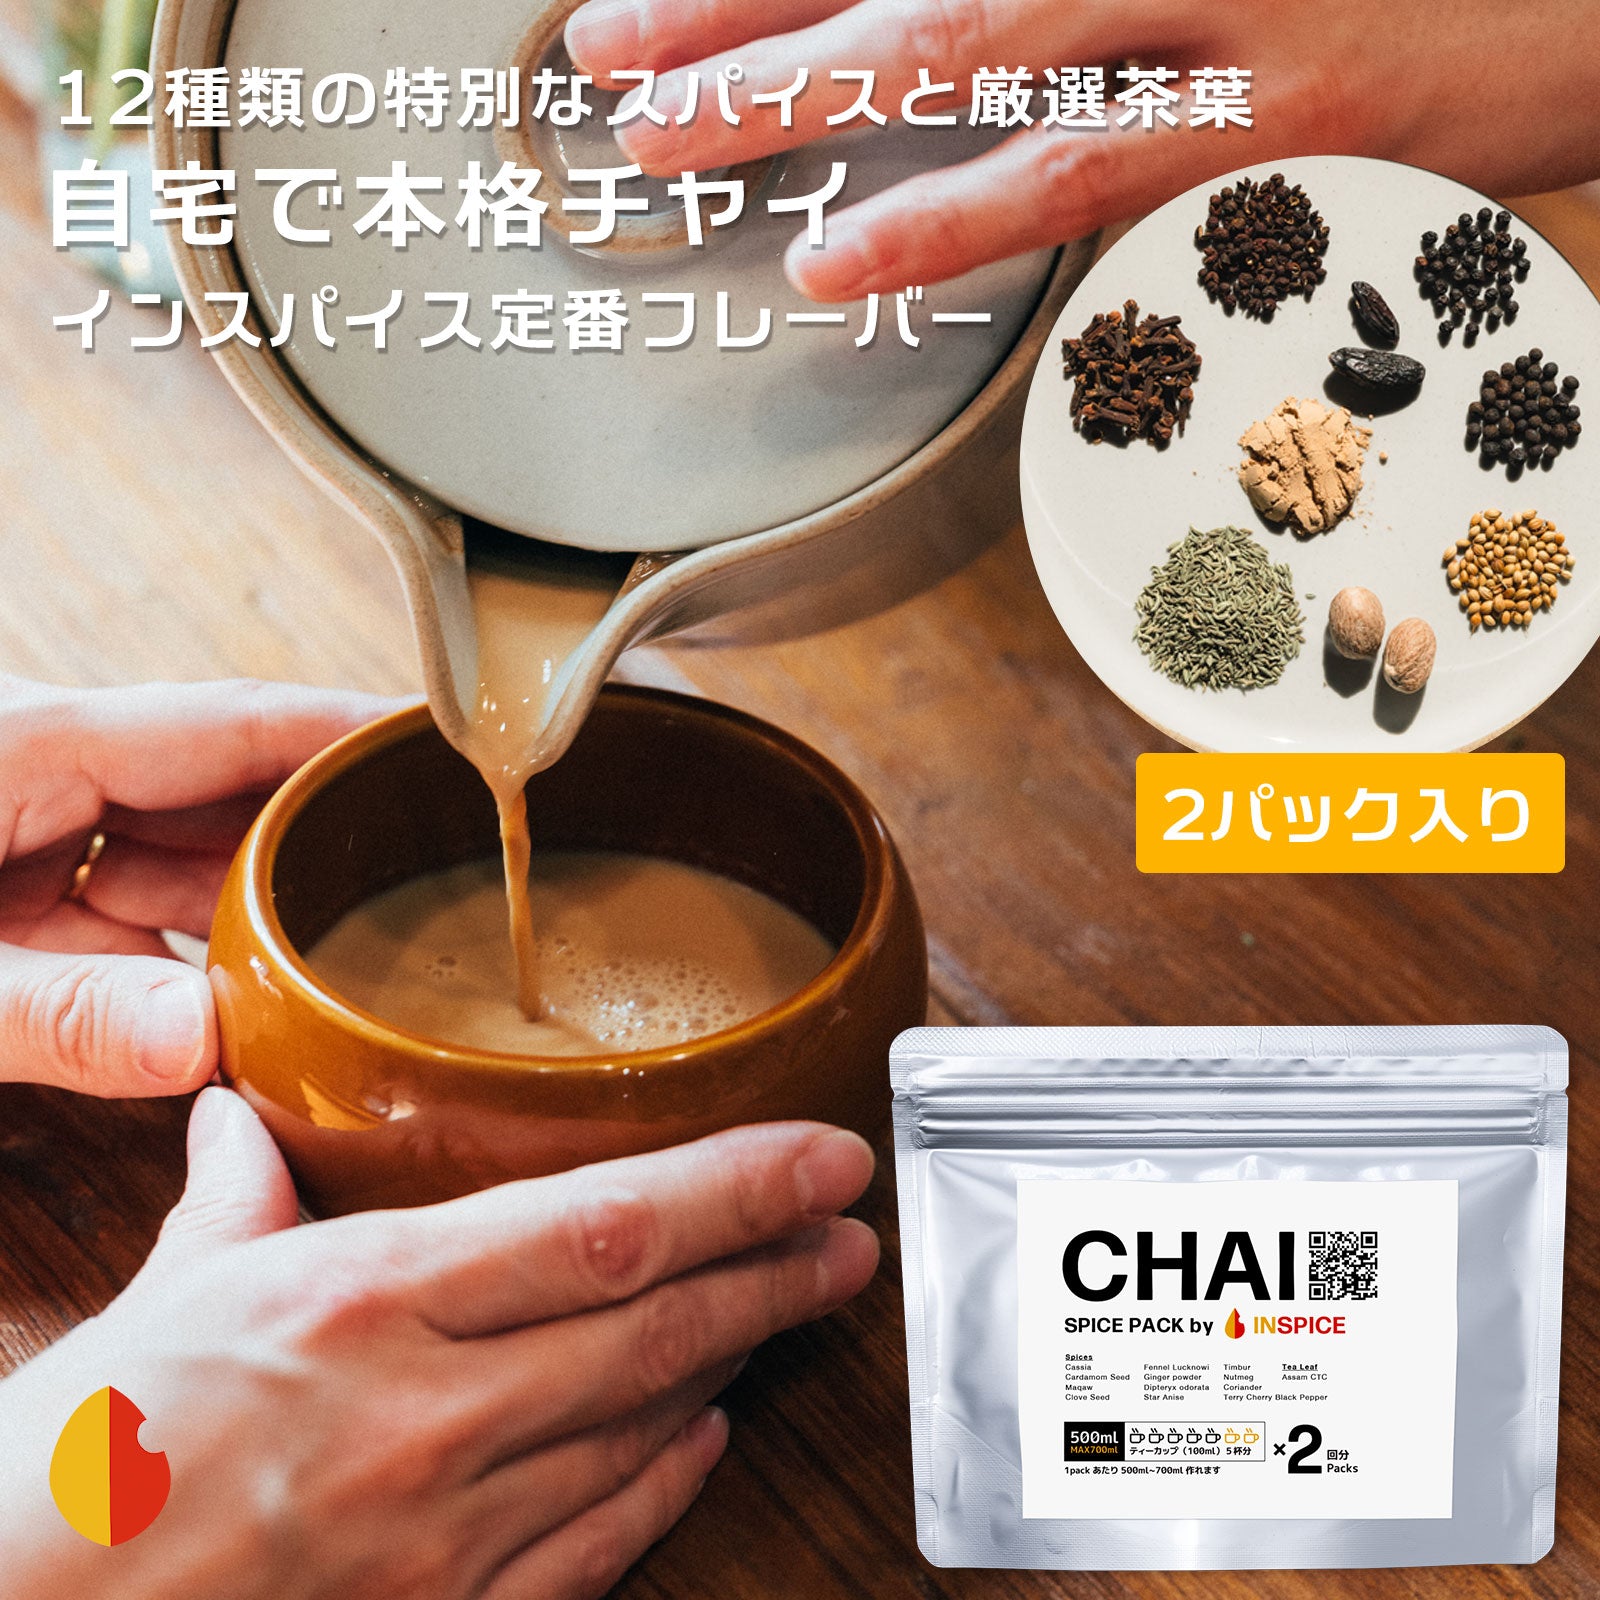 INSPICE CHAI SPICE PACK「チャイ スパイスパック」 2パック入り｜商品